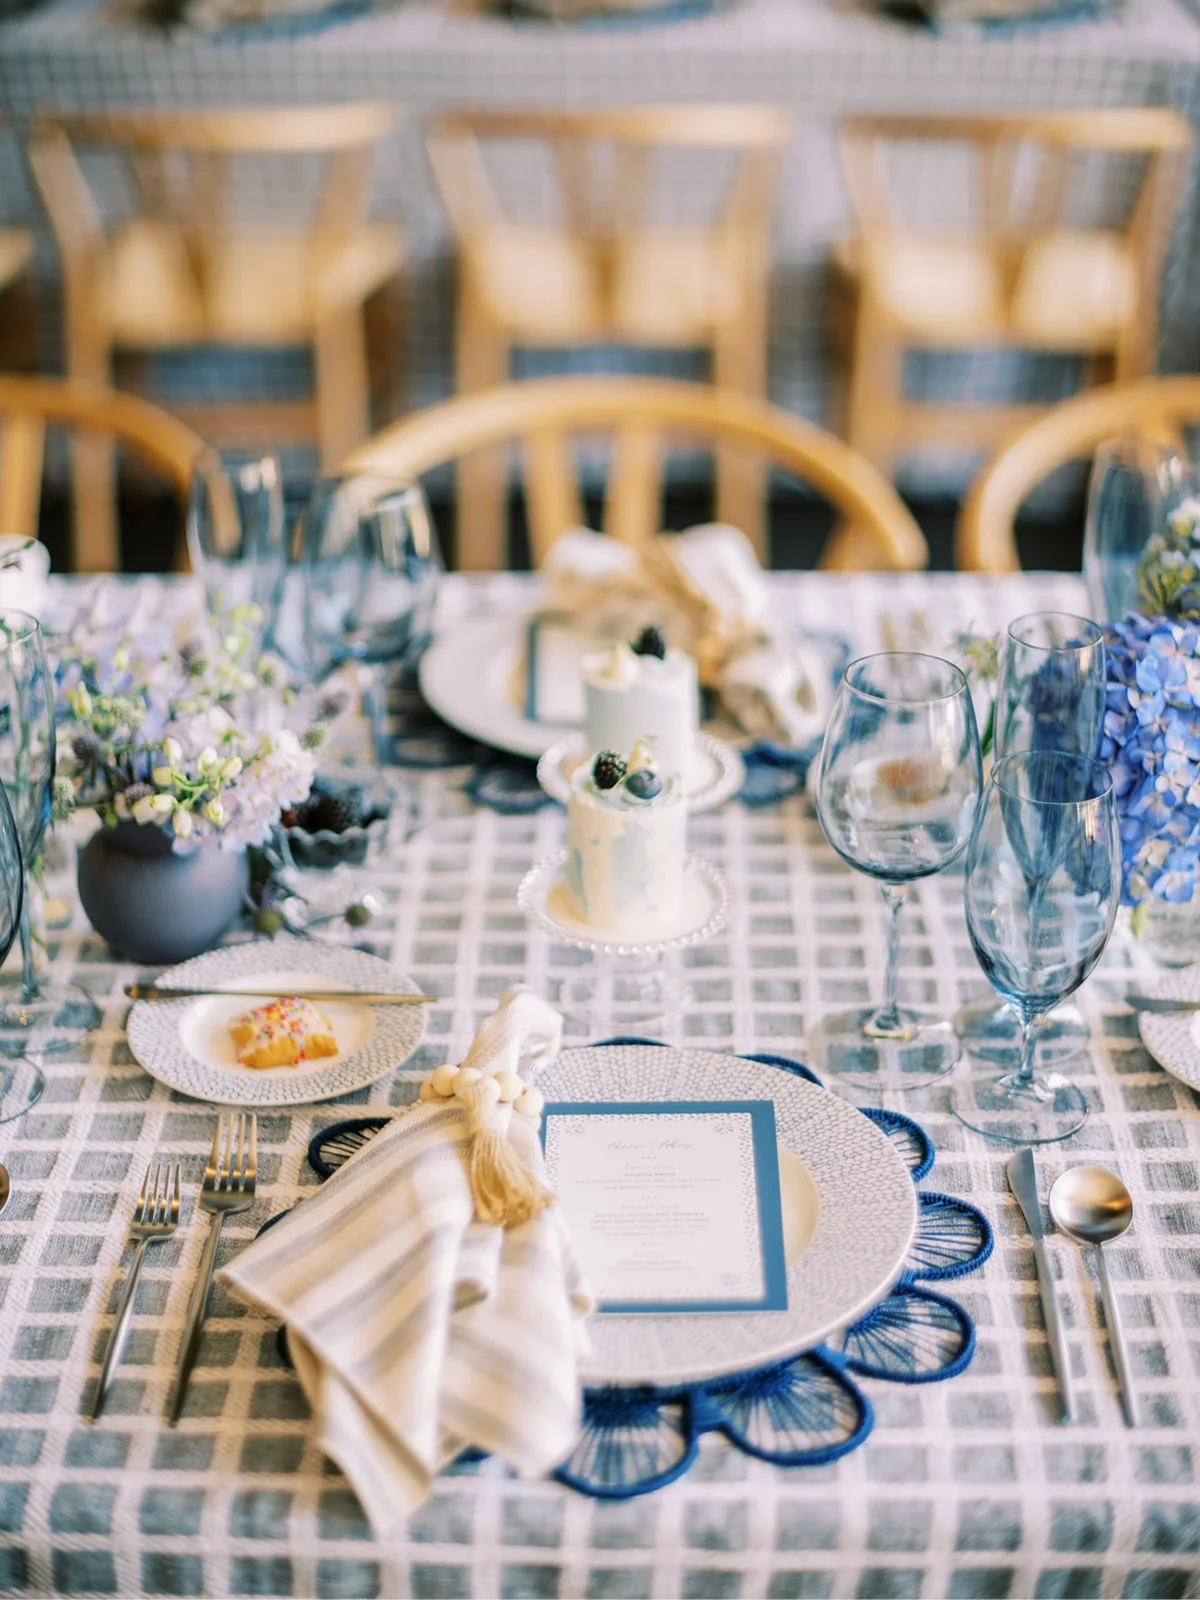 Elegant table setting with blue floral centerpiece, patterned table linens, and place cards for a wedding shower.